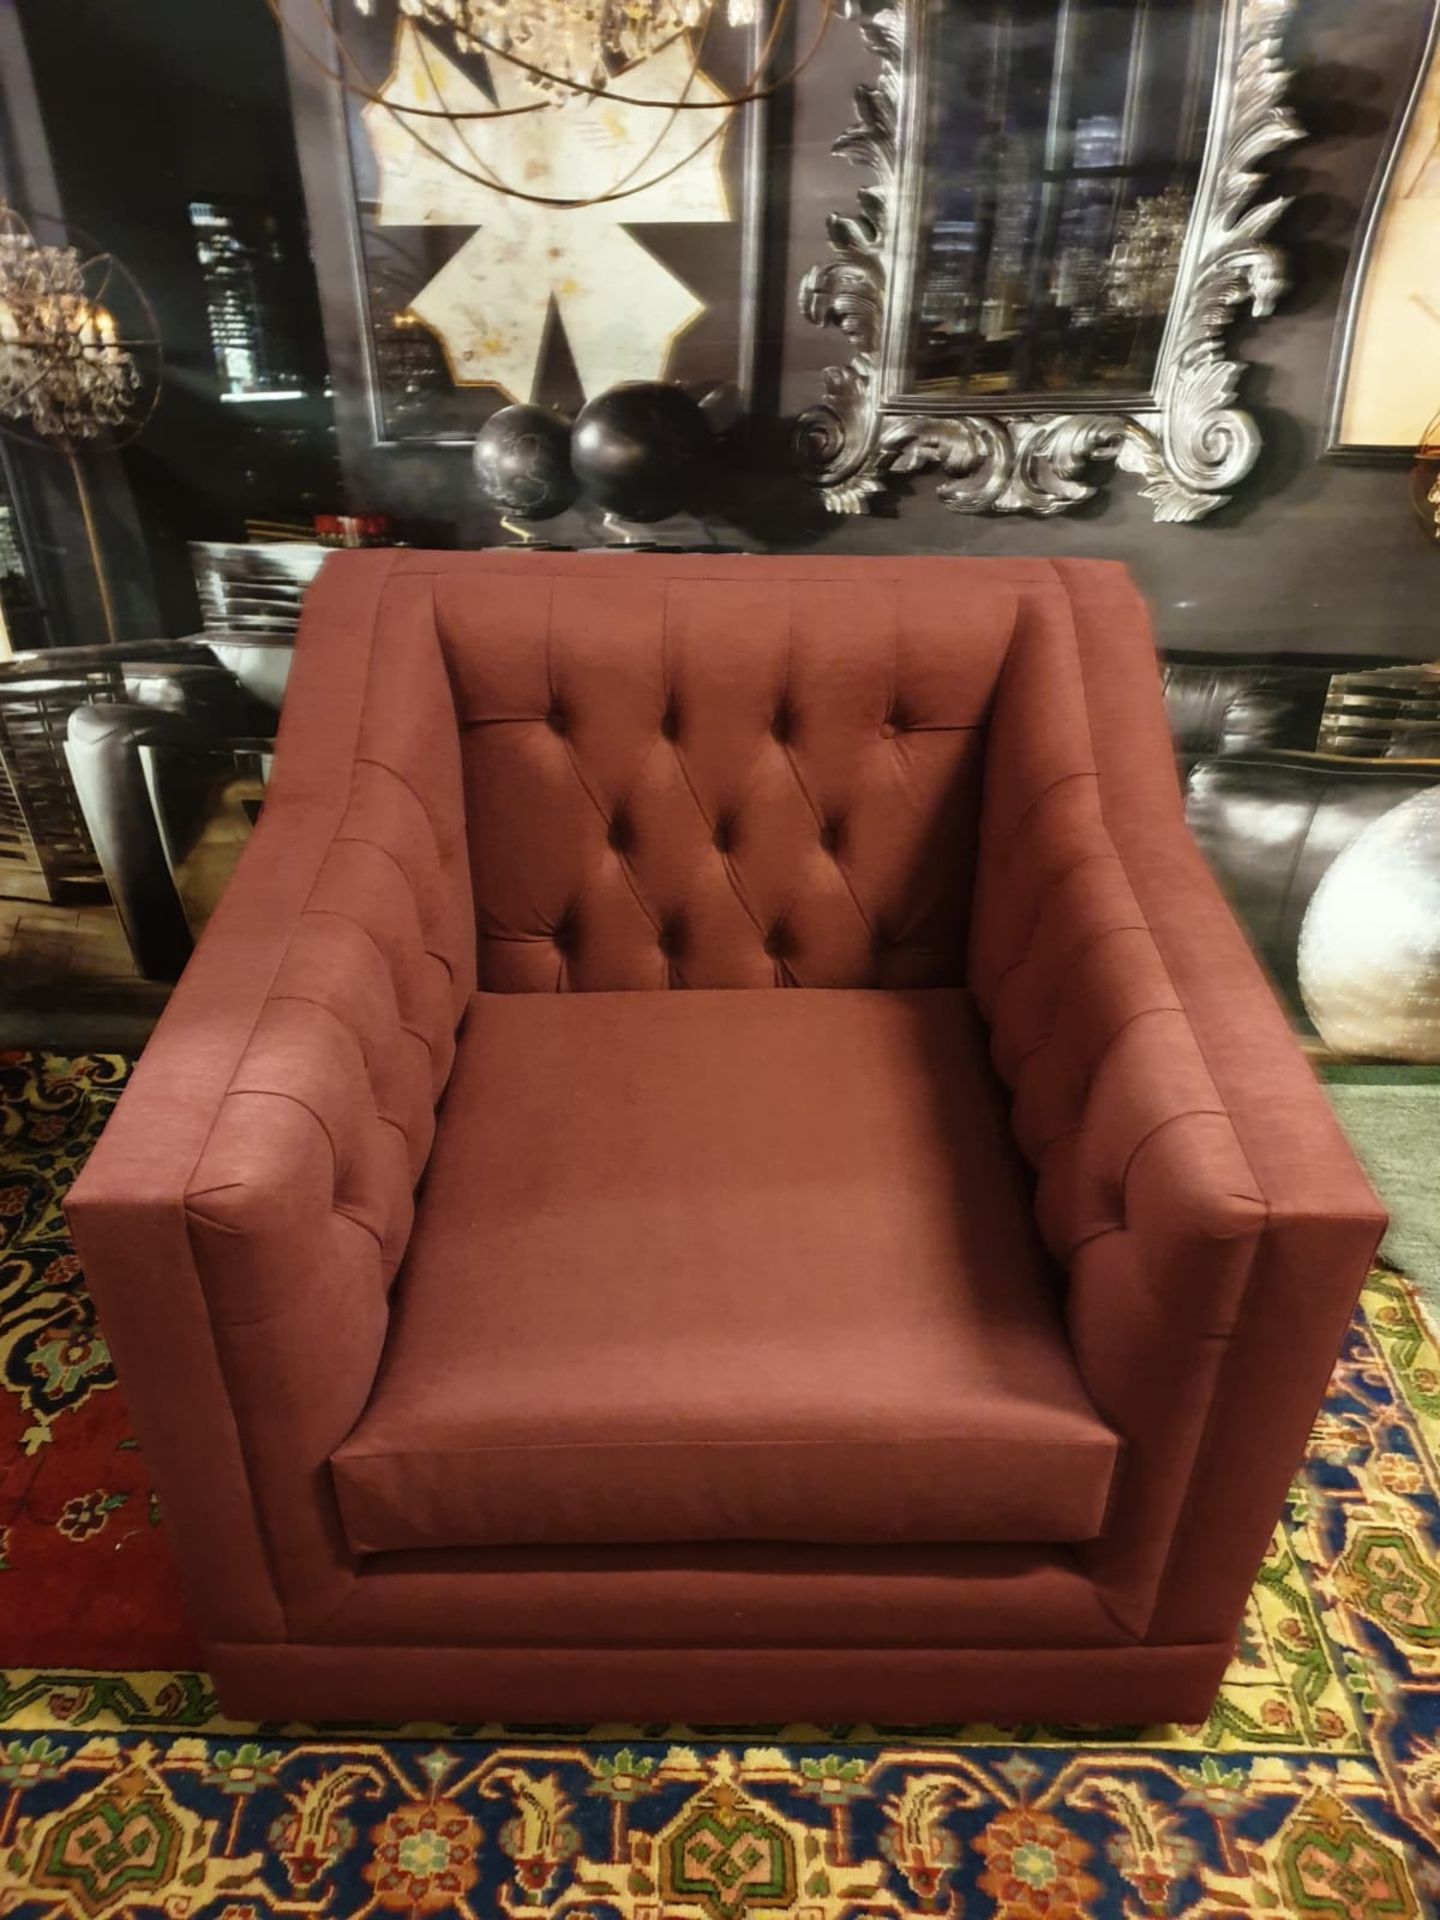 James Armchair Berwick Marsala Style thy name is James. This twist on a Chesterfield is a classic - Image 2 of 3